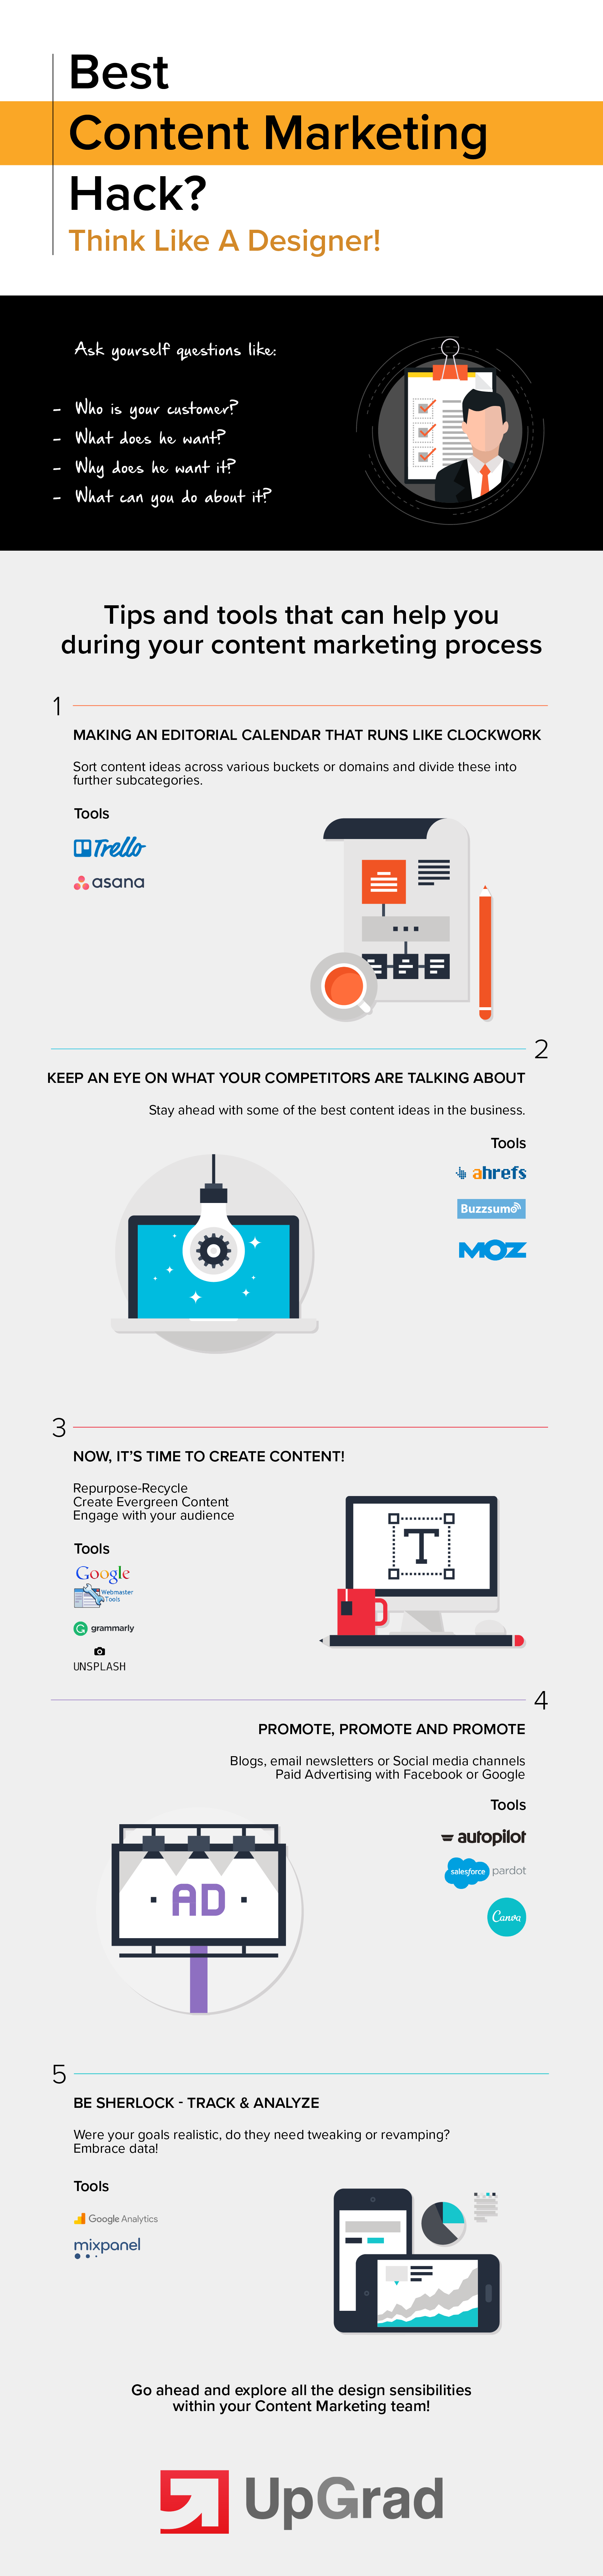 Content Marketing Infographics design thinking in content marketing some ideas and tools to ace the process UpGrad Blog